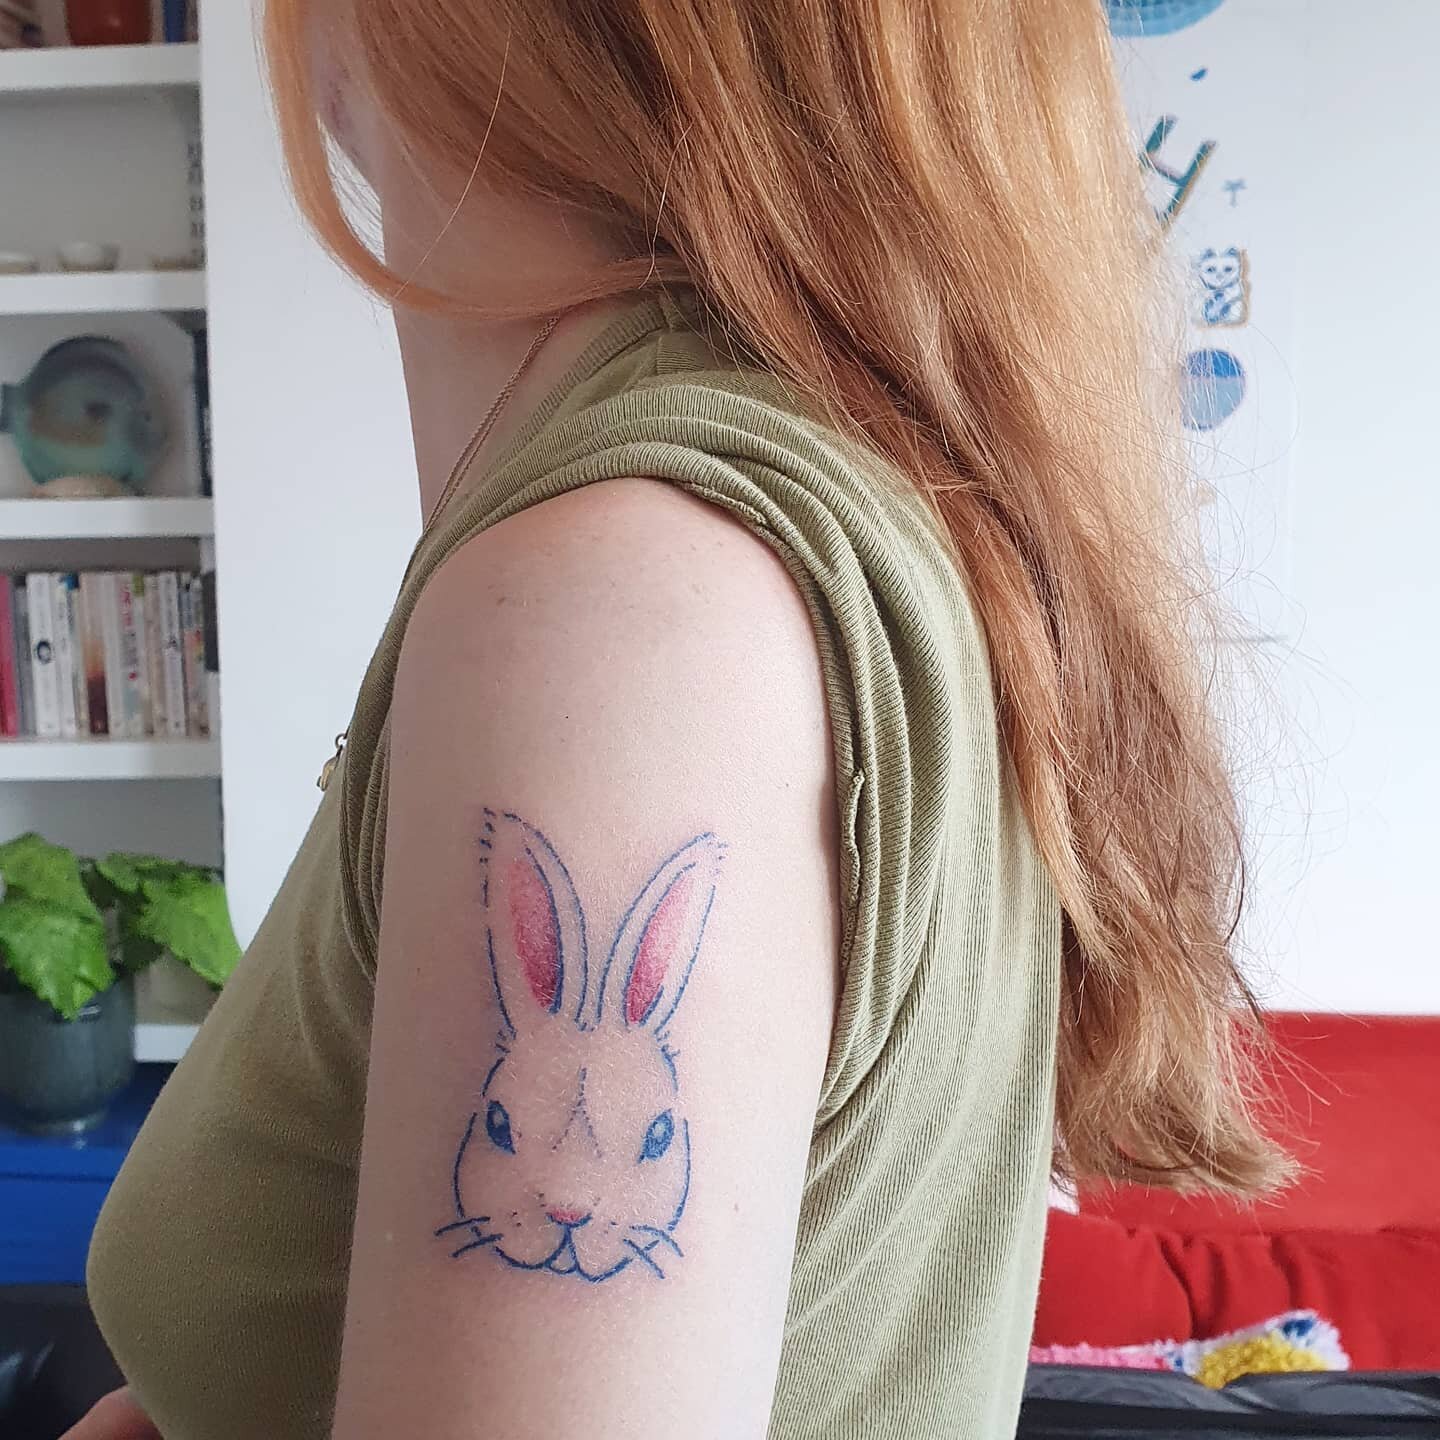 Thank you @ehghead for travelling to come get a bunny flash arm tatt. And also going big on her too 🐇
Such a nice afternoon spent chatting. 
.
.
.
.
.
#handpokeartist #handpokedtattoo #handpoke #sticknpoke #tattoo #armtattoo #rabbit #colourtattoo #b